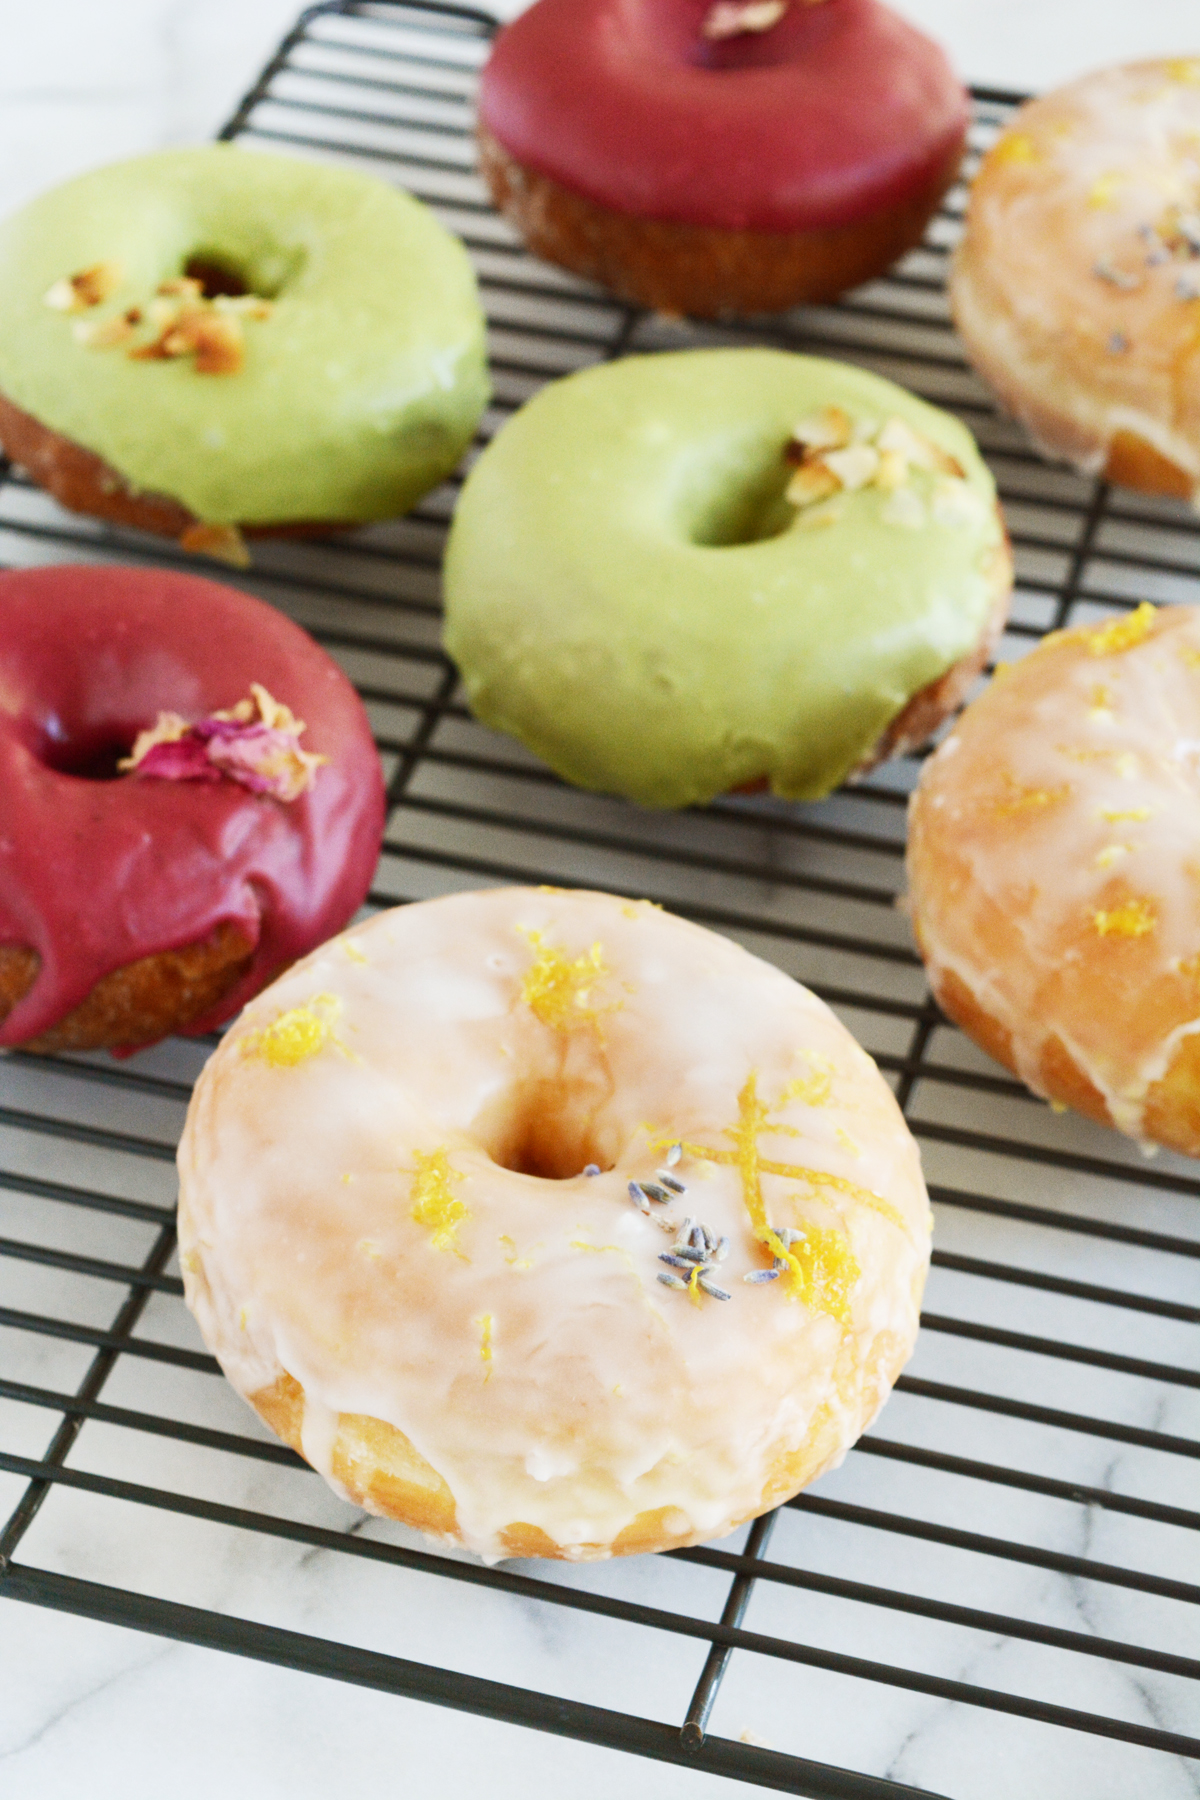 Faux Gourmet Donuts - give grocery store donuts a makeover with 3 yummy flavor combinations.